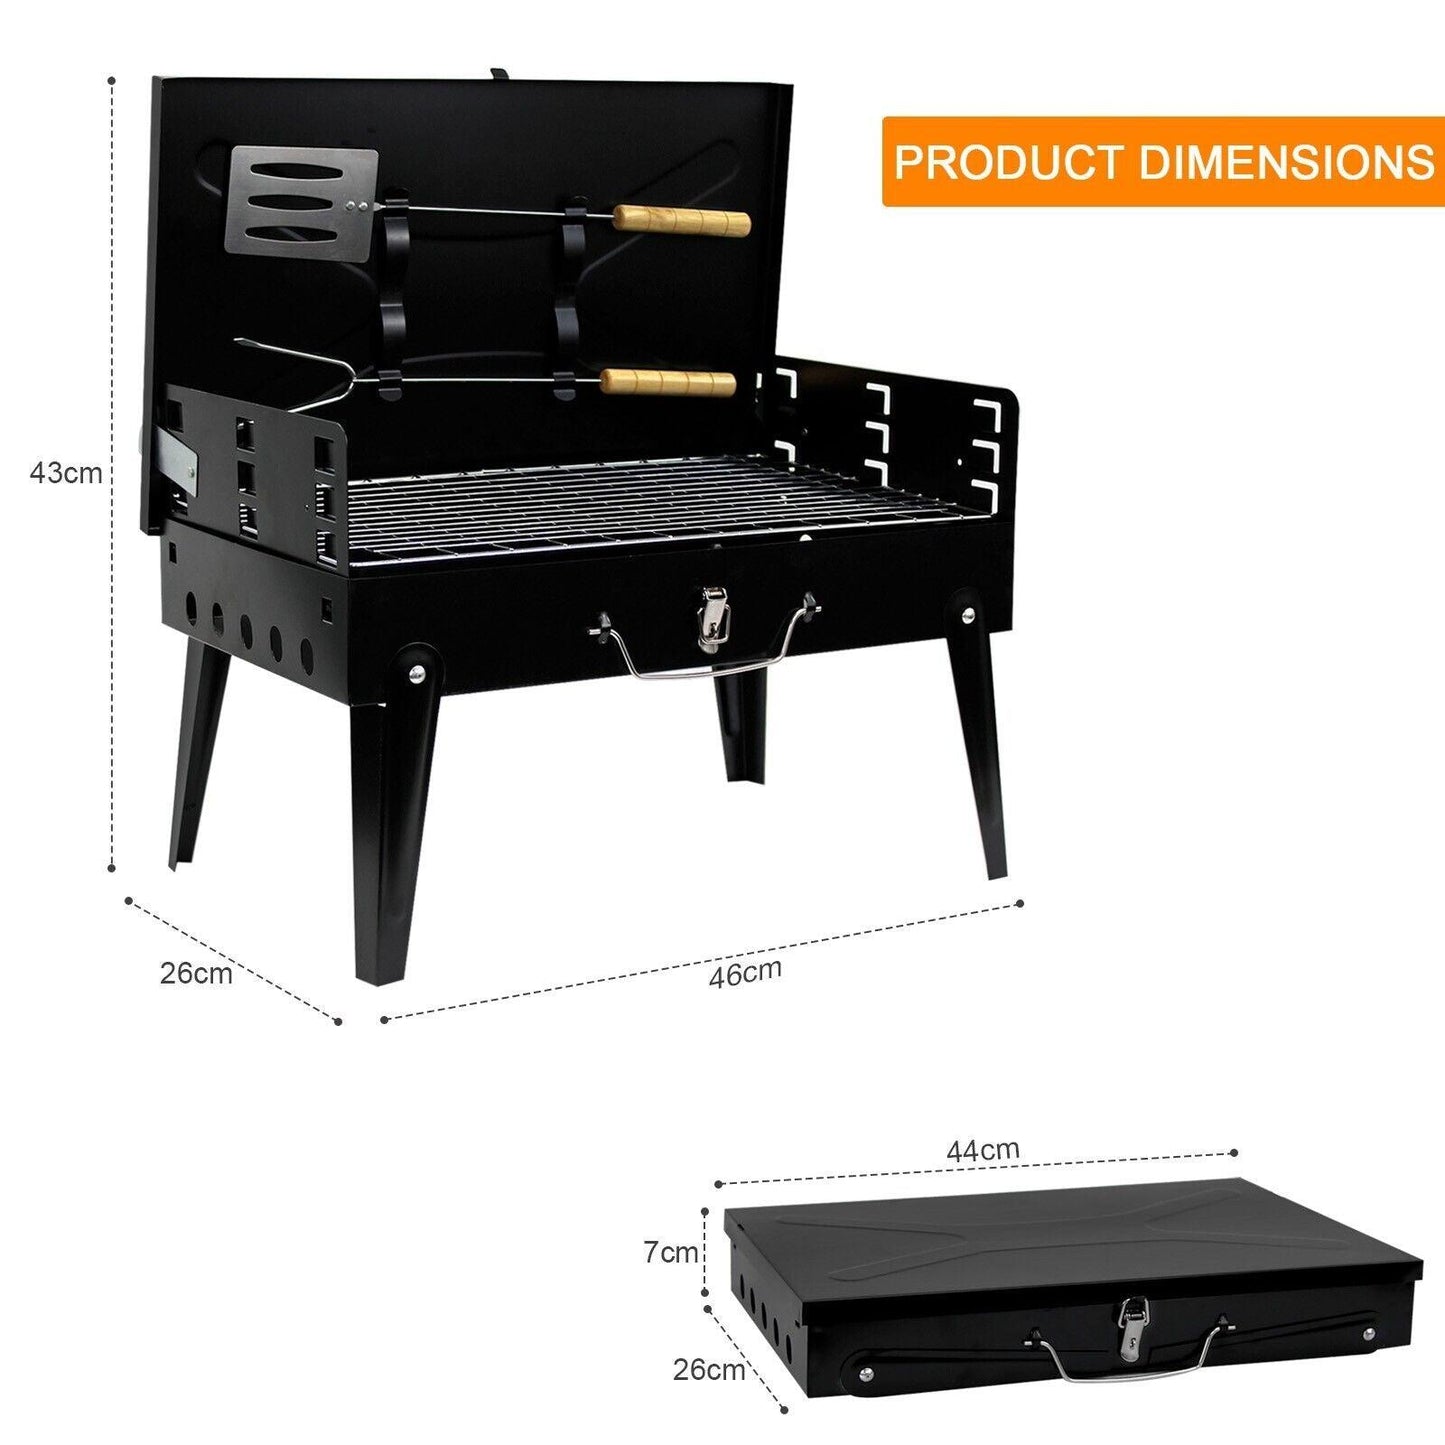 Portable Folding Charcoal BBQ: Camping Grill for Outdoor Picnics - Click